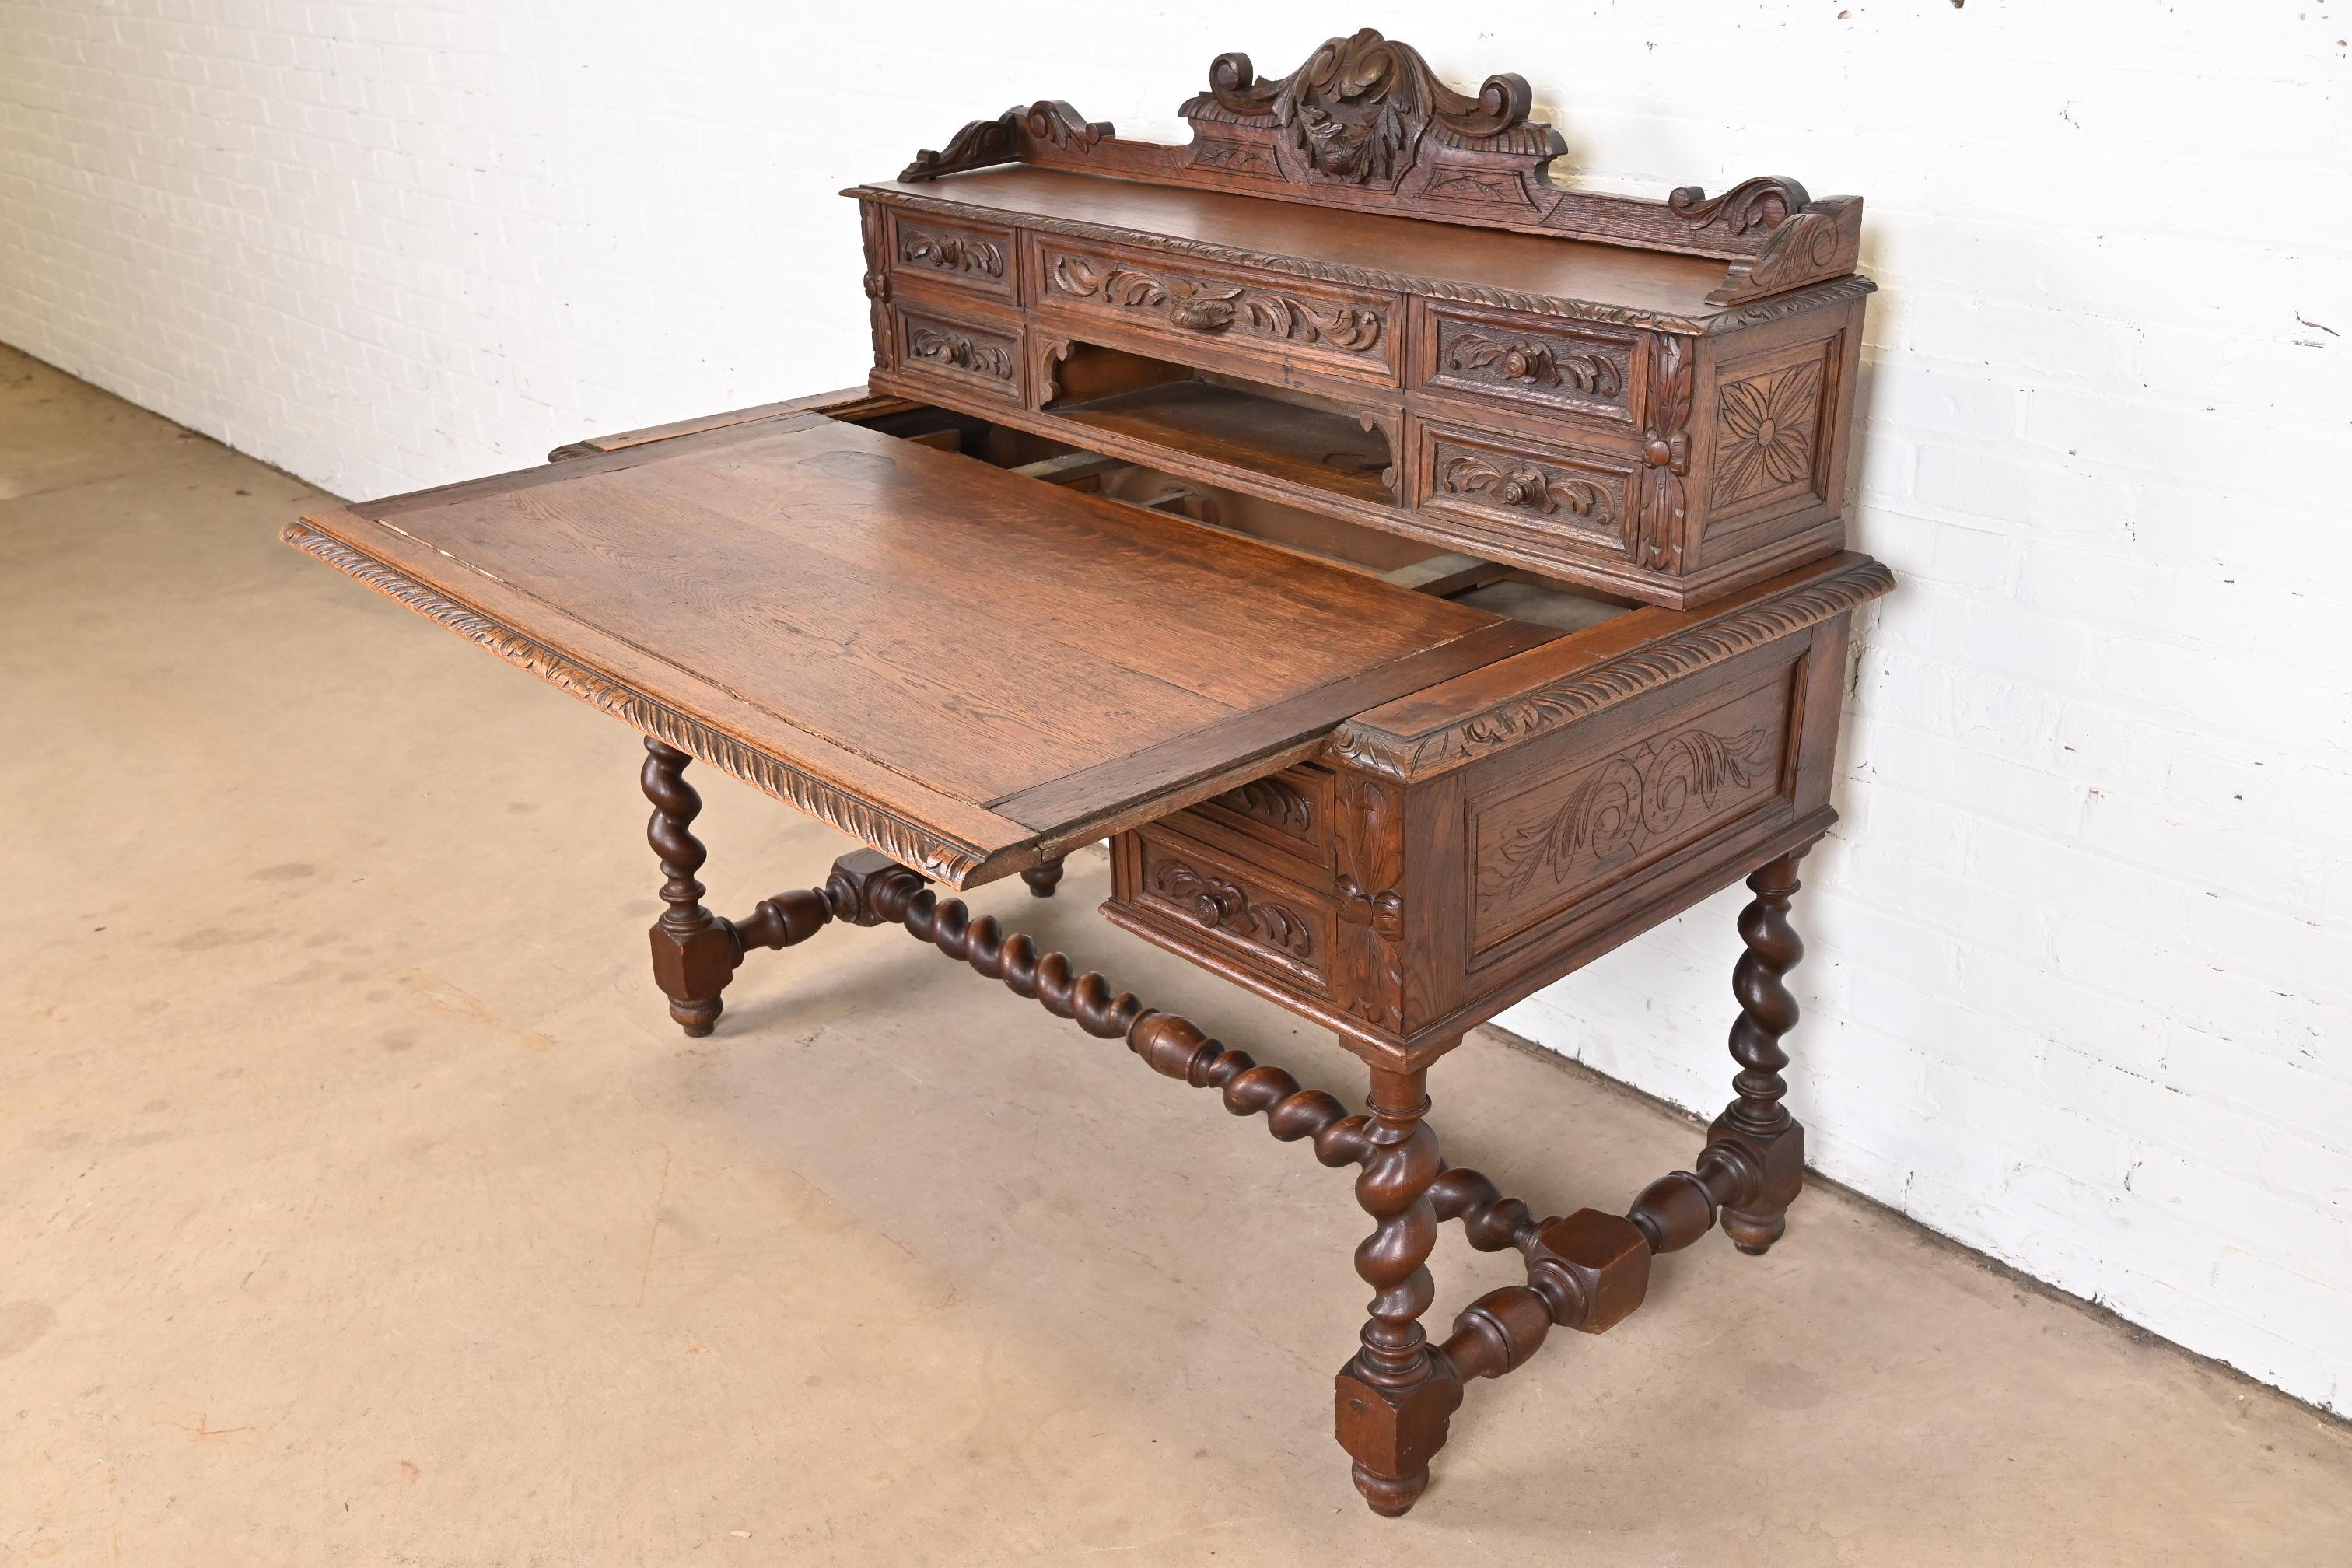 19th Century French Black Forest Carved Oak Writing Desk With Barley Twist Legs For Sale 6